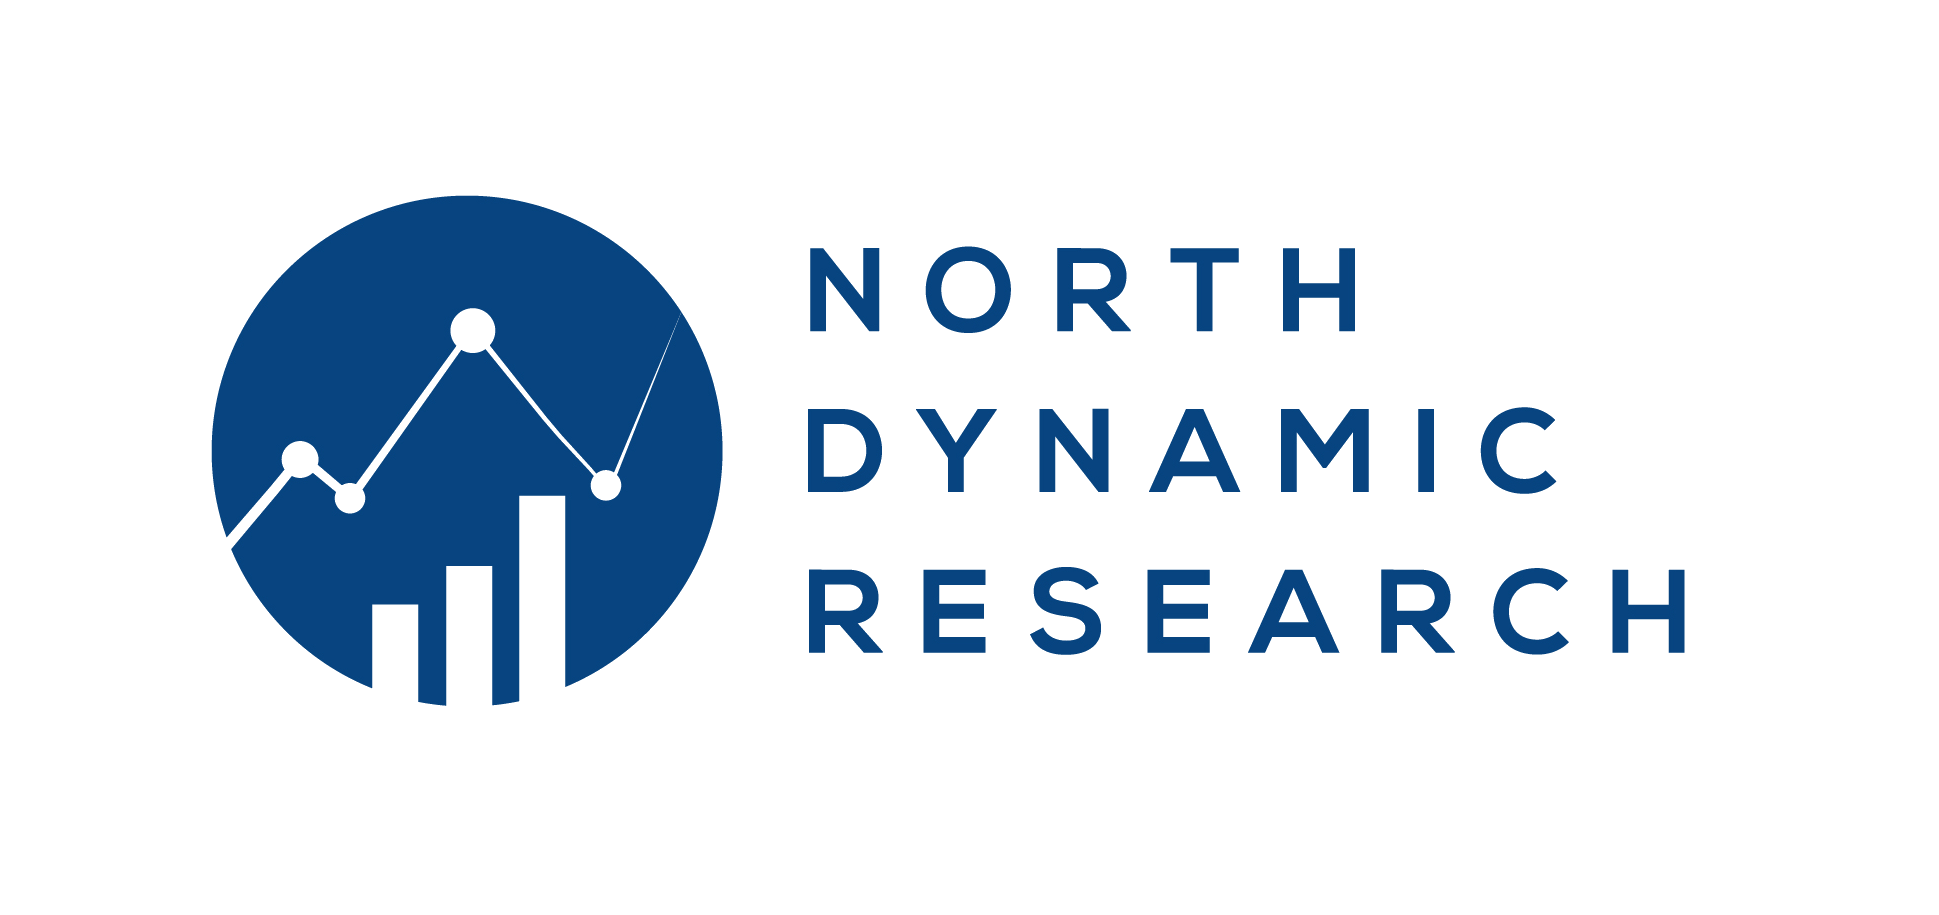 North Dynamic Research